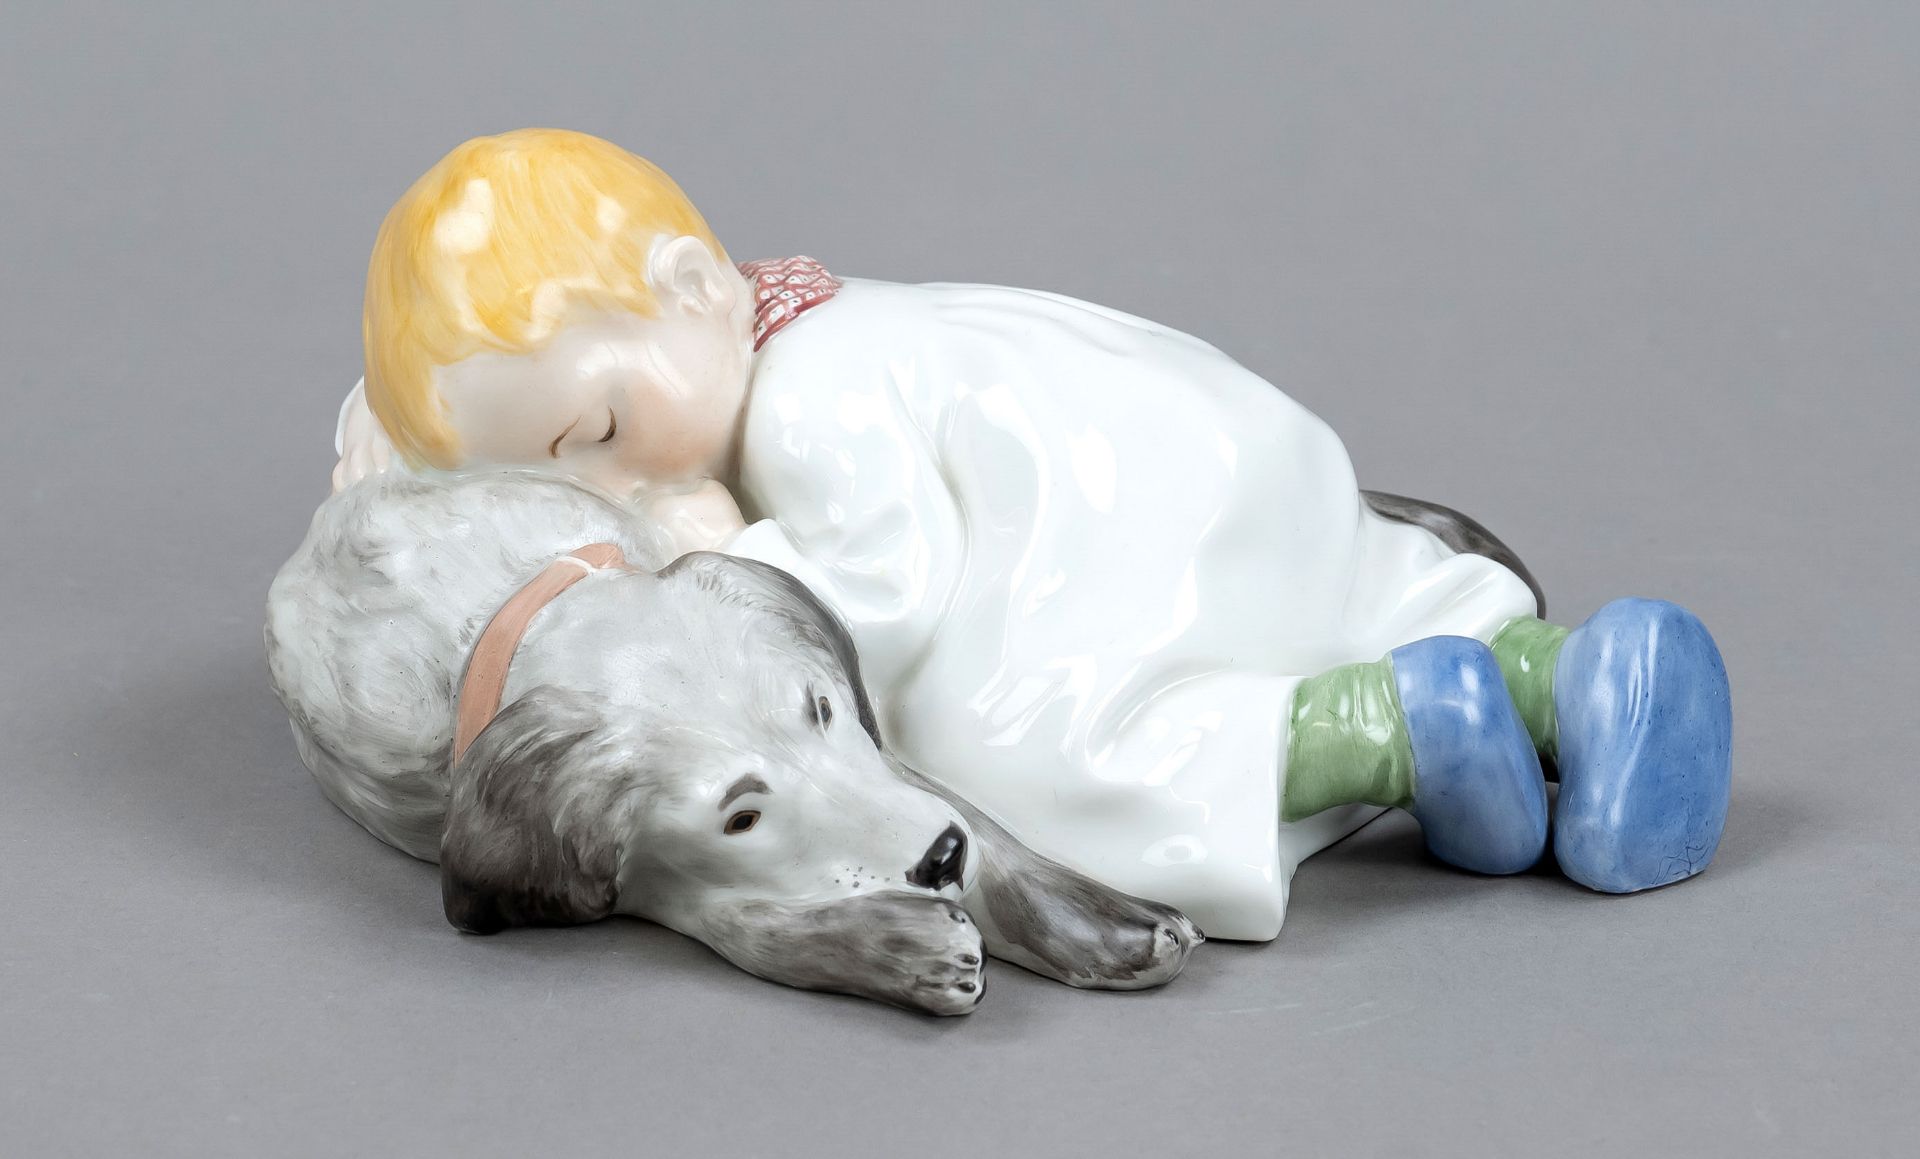 Art Nouveau figure, child sleeping on dog, Meissen, end of 20th century, 2nd choice, designed by